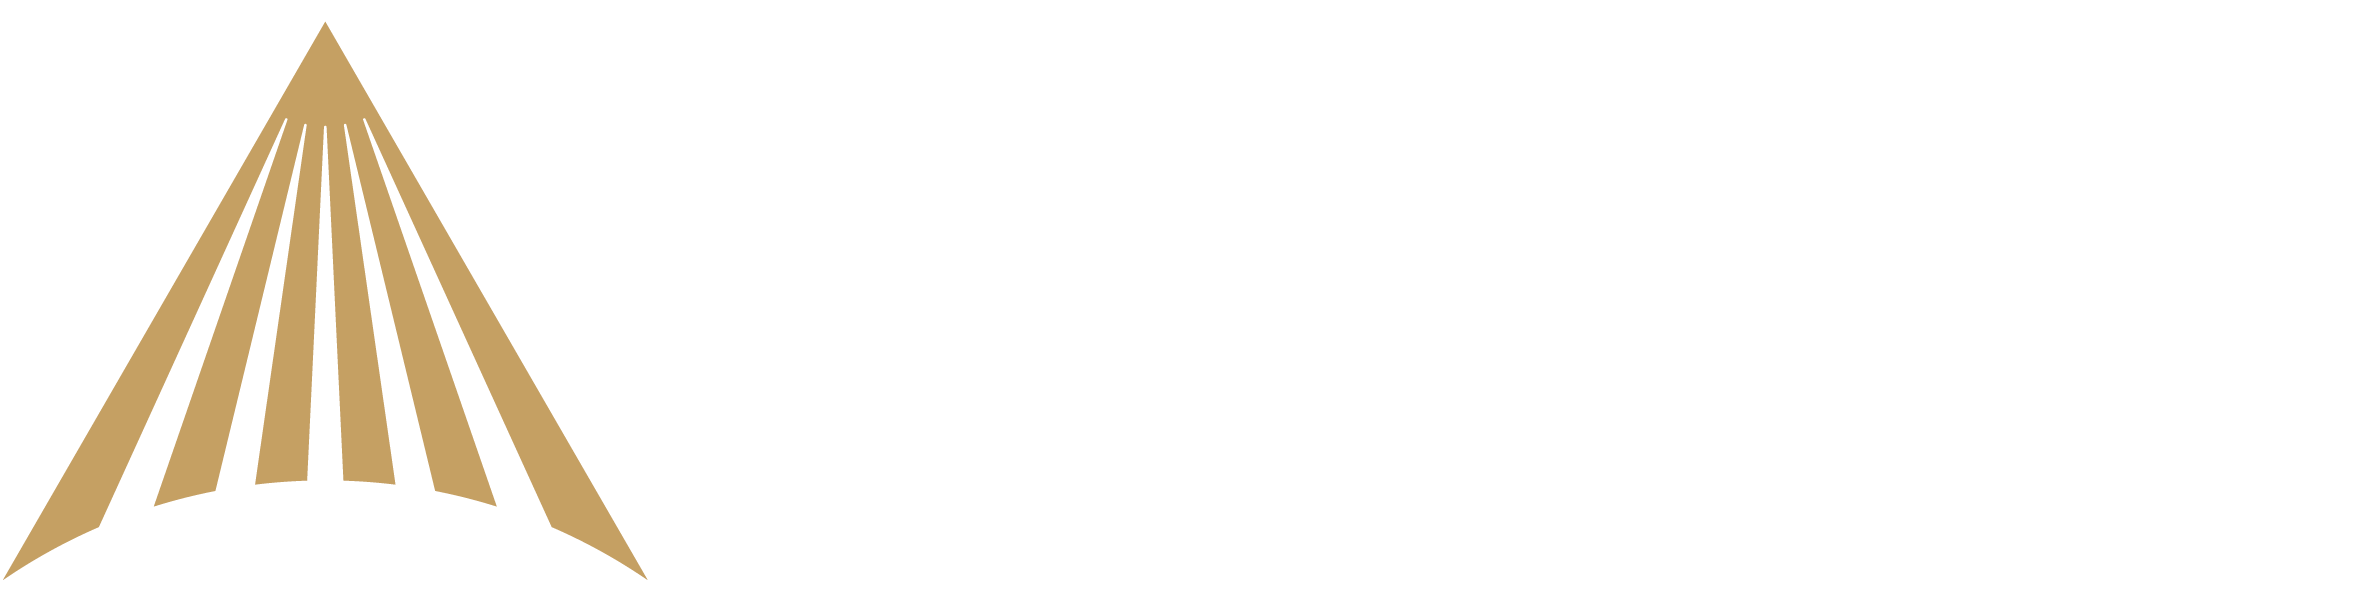 River Intelligence – Bitcoin Research & Analysis